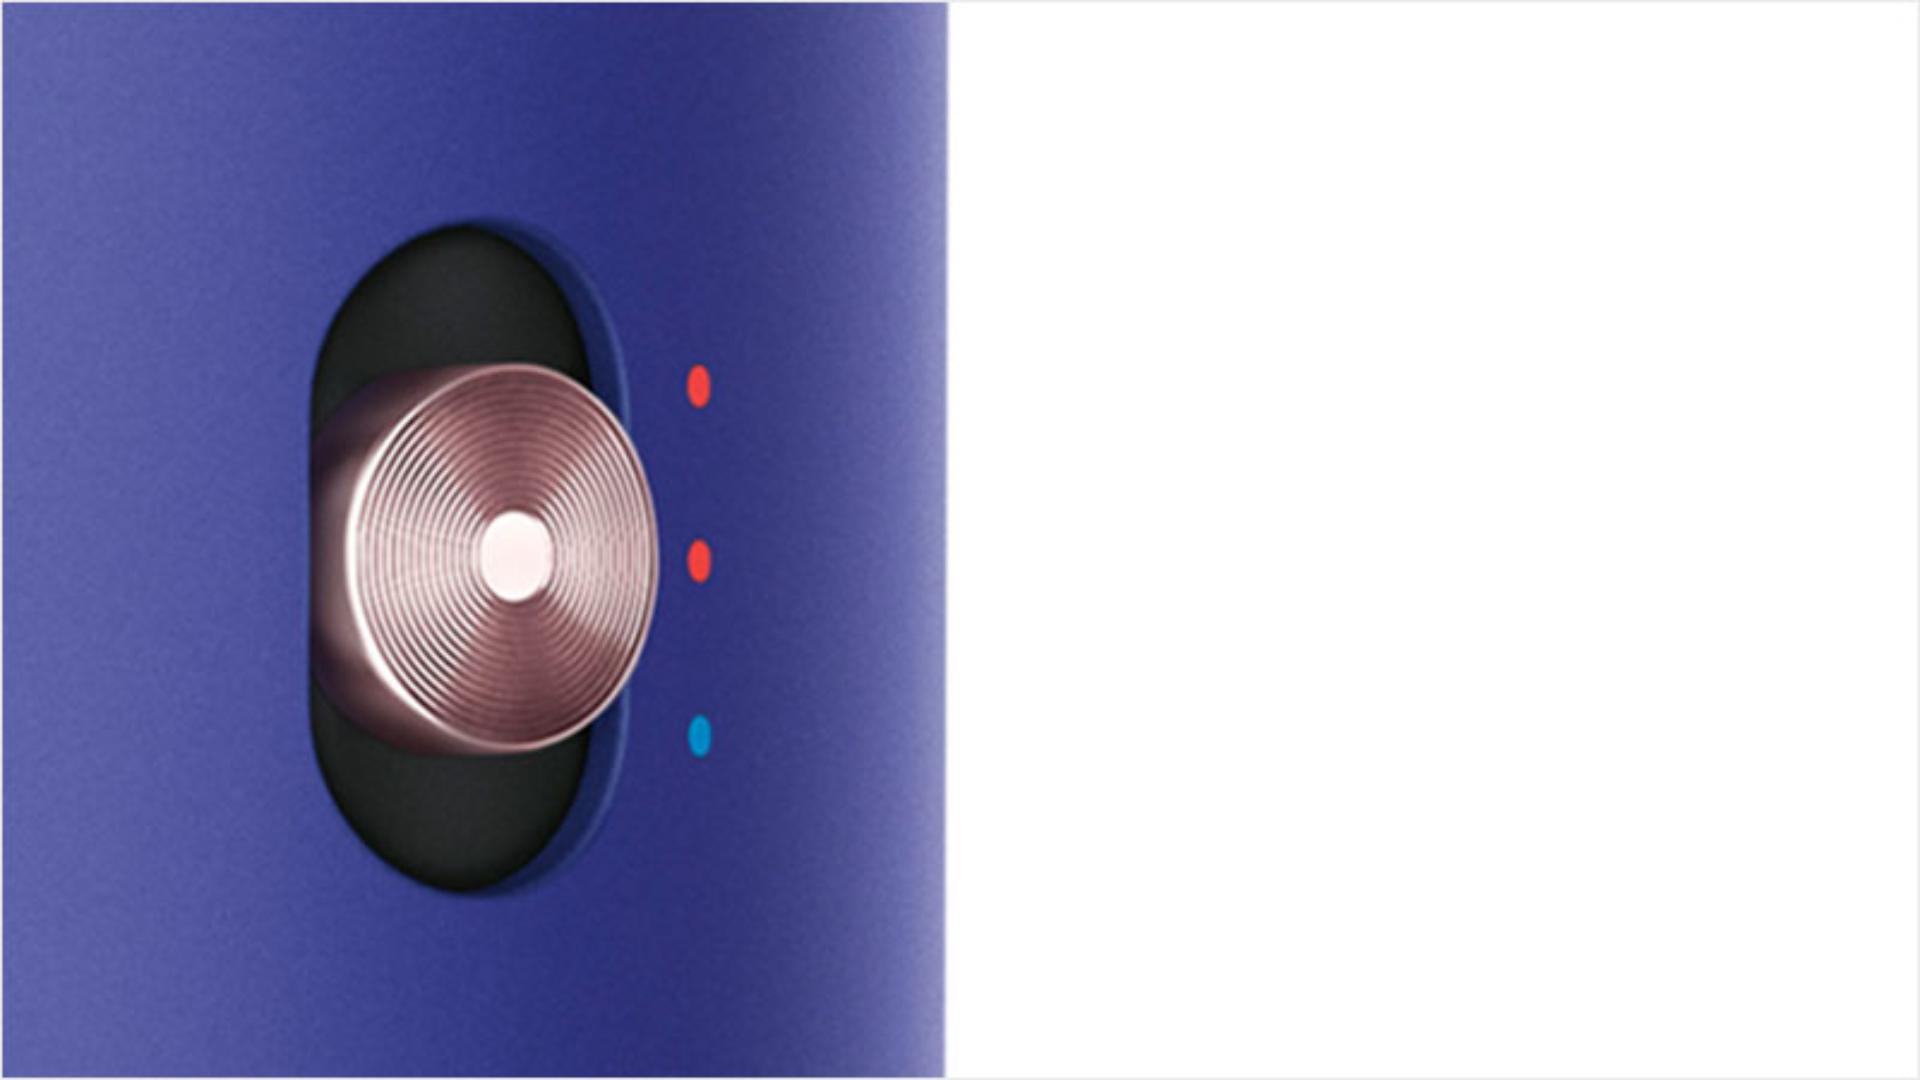 Close-up of heat control button on Dyson Airwrap